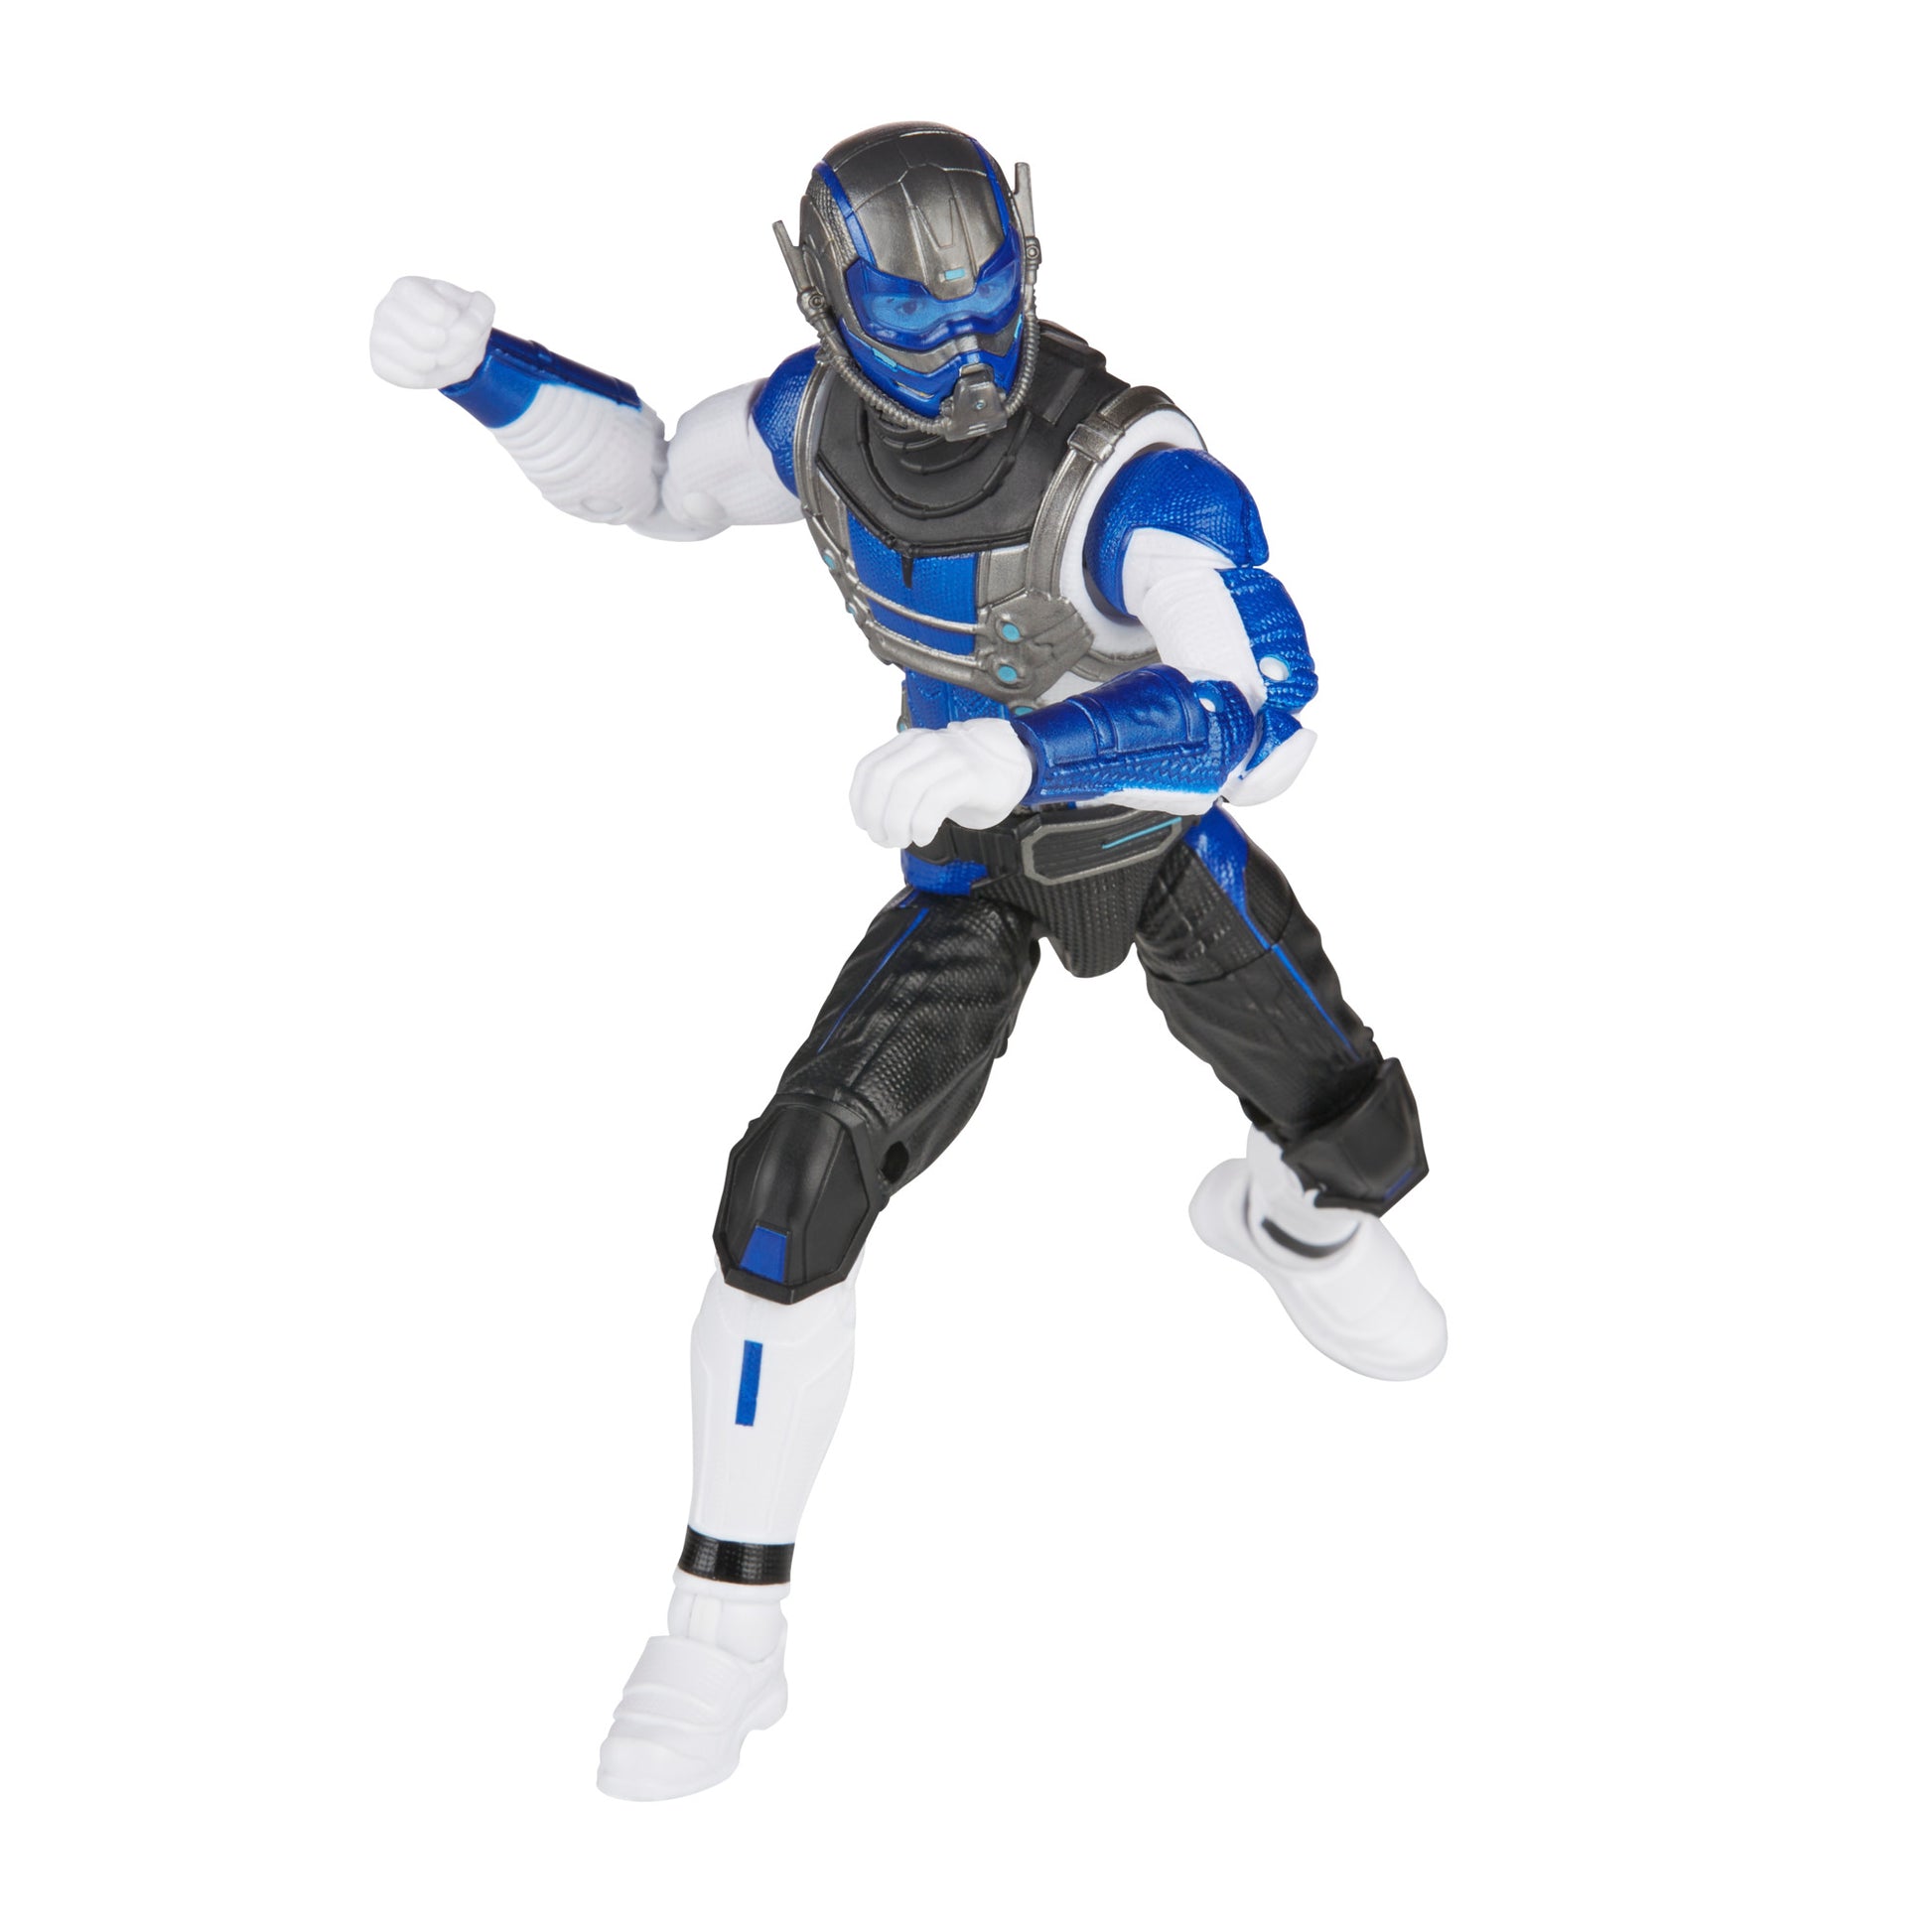 Marvel Legends Series Marvel’s Goliath Action Figure 6-Inch Toy attak pose - Heretoserveyou